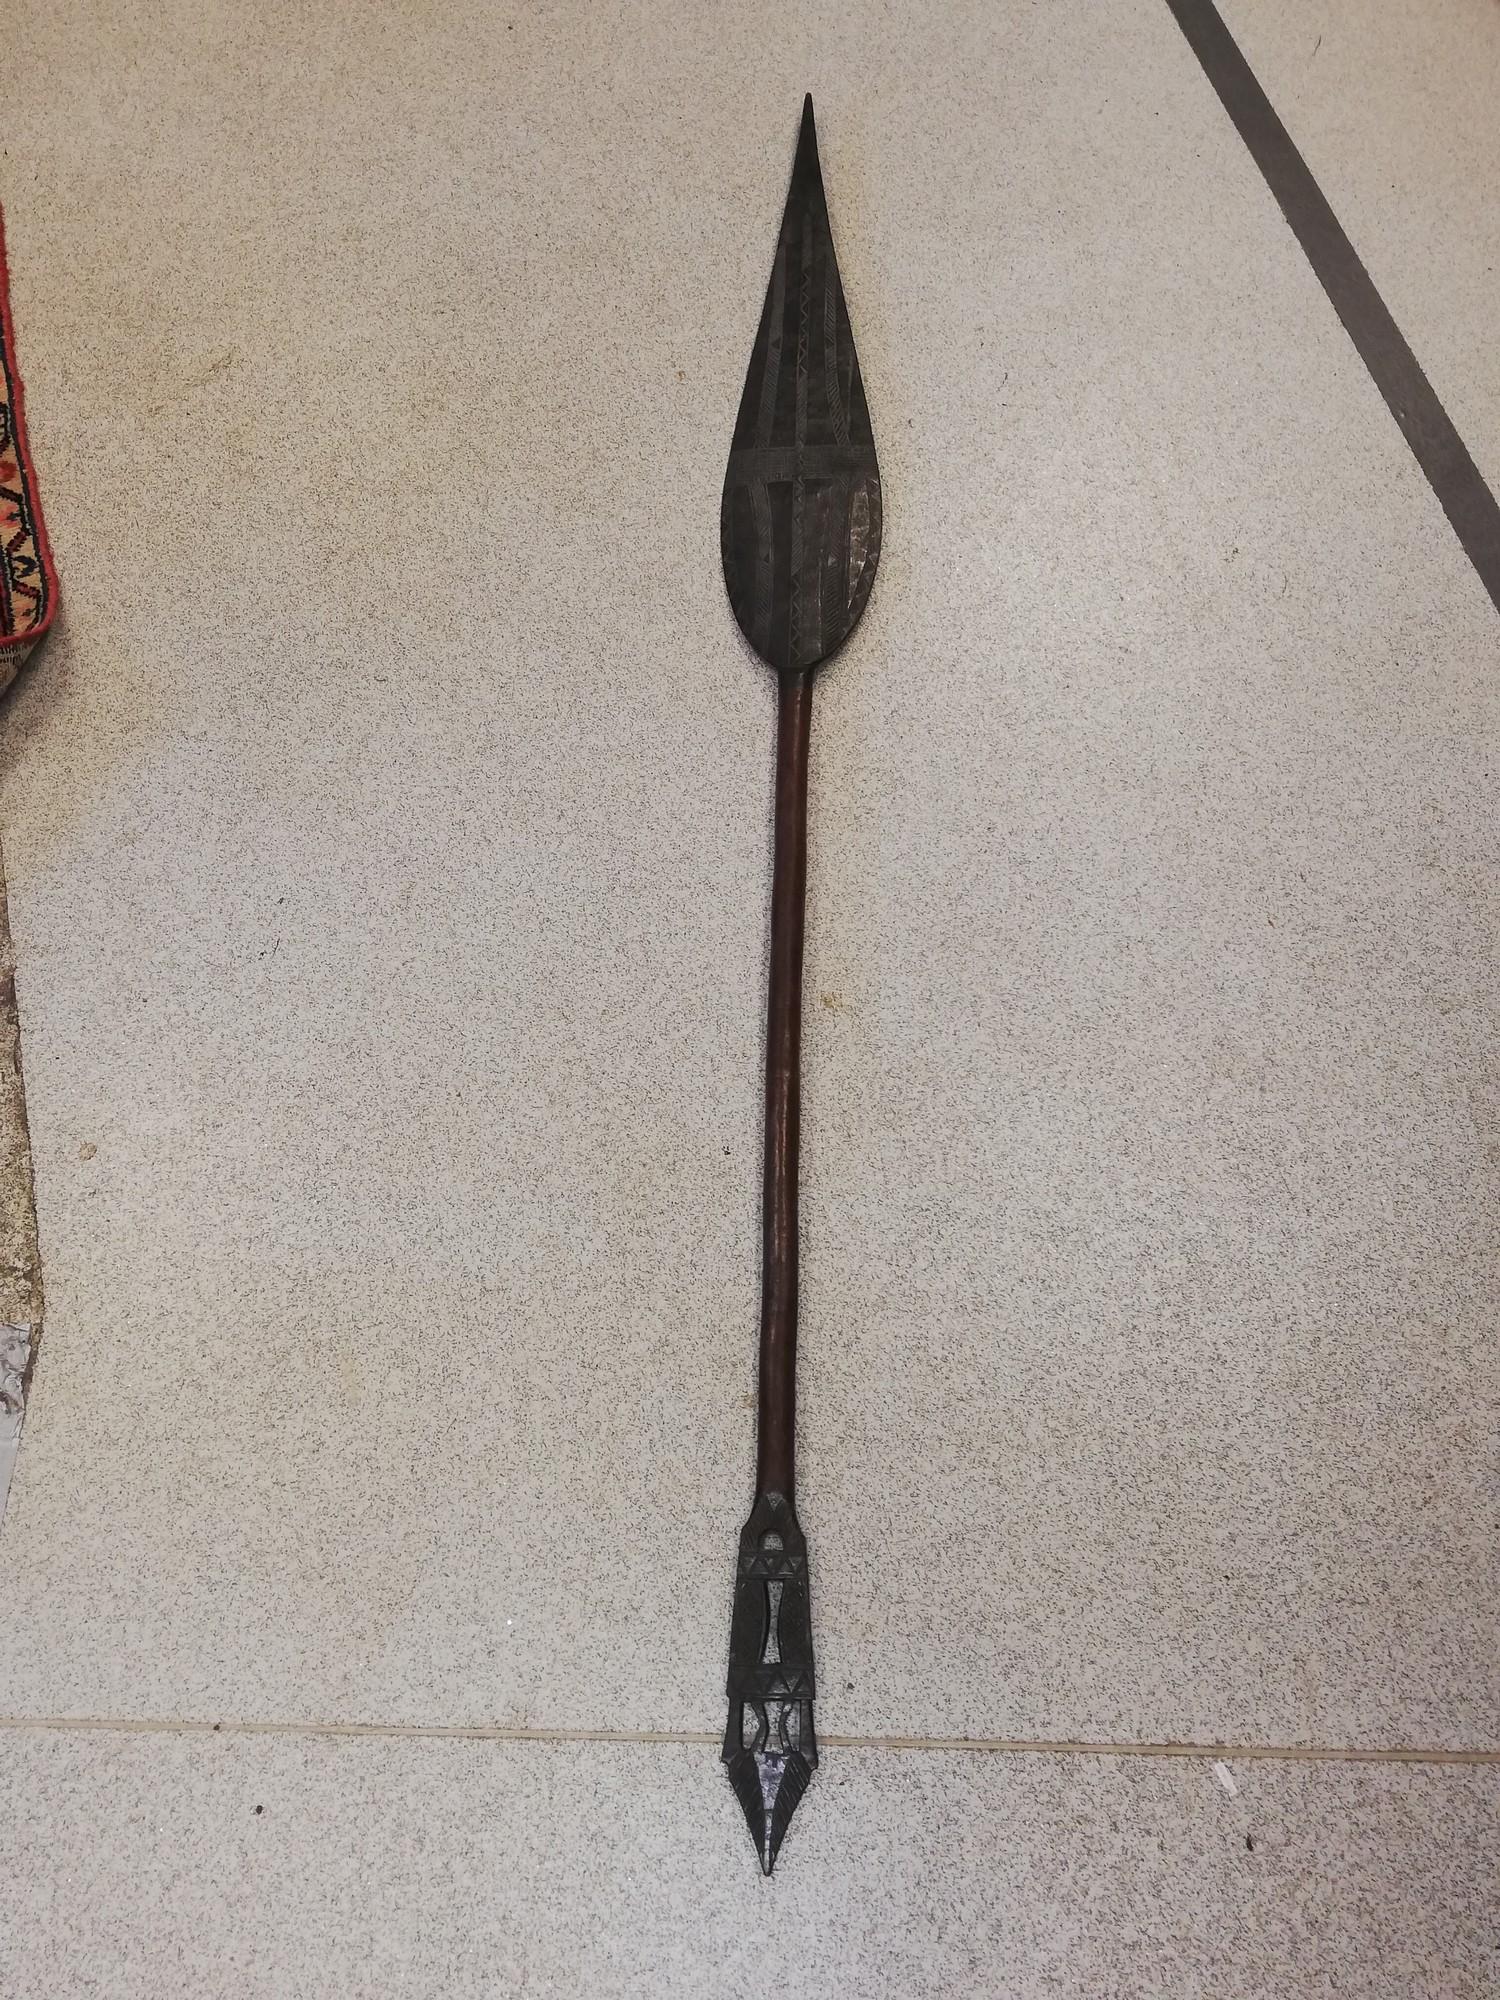 early 20th century ethnic ceremonial hoe / paddle with lanceolate shaped blade -approx 66" long